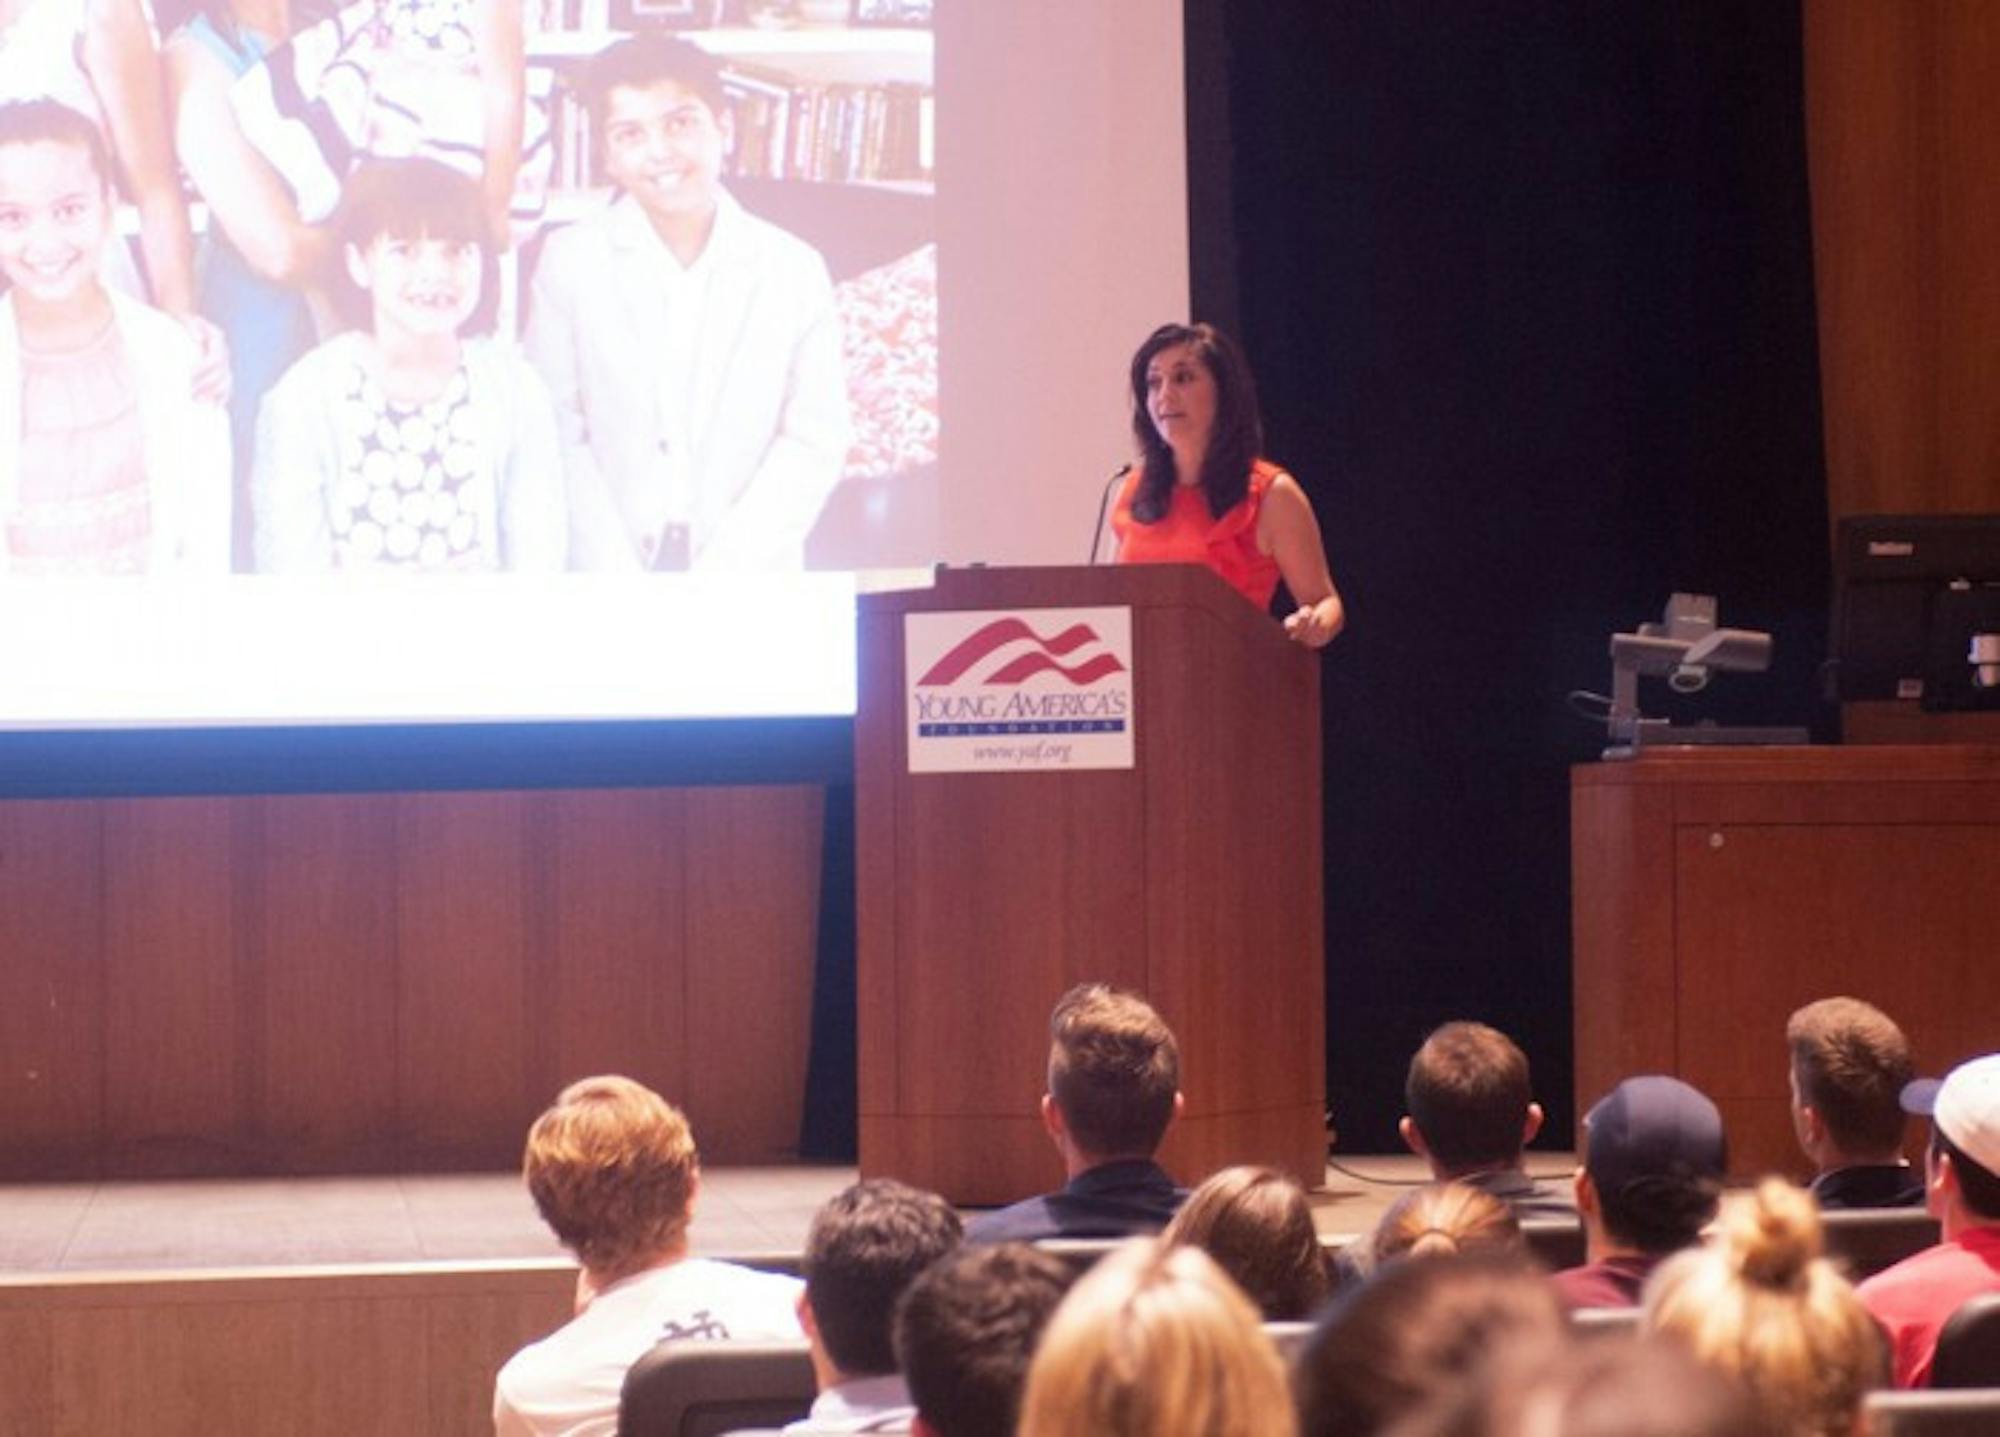 Rachel Campos-Duffy spoke about Hispanics, conservatism and feminism during a lecture Thursday night.